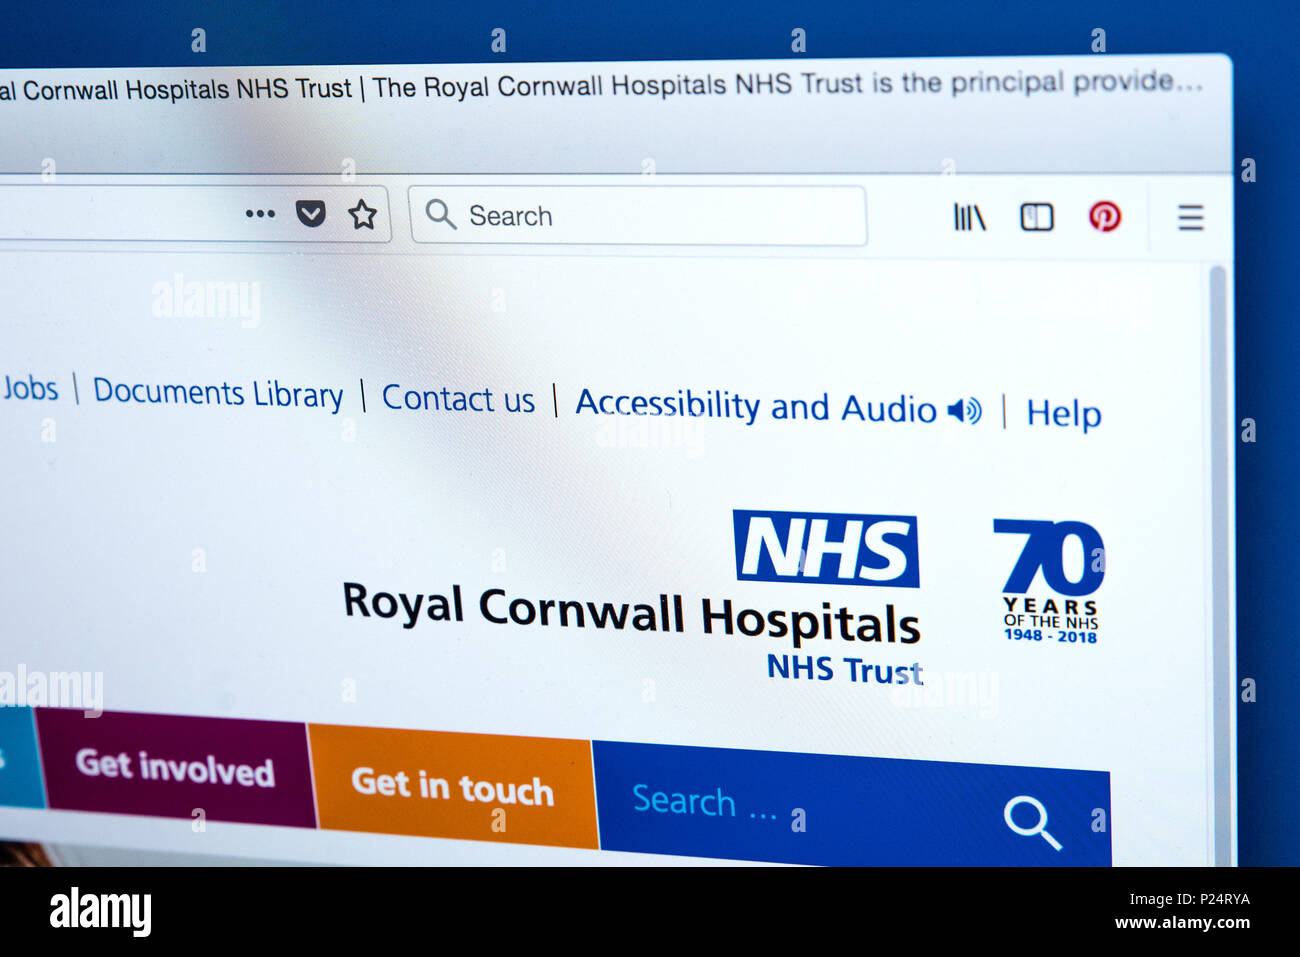 LONDON, UK - MARCH 5TH 2018: The homepage of the official website for the Royal Cornwall Hospitals NHS Trust, on 5th March 2018. Stock Photo